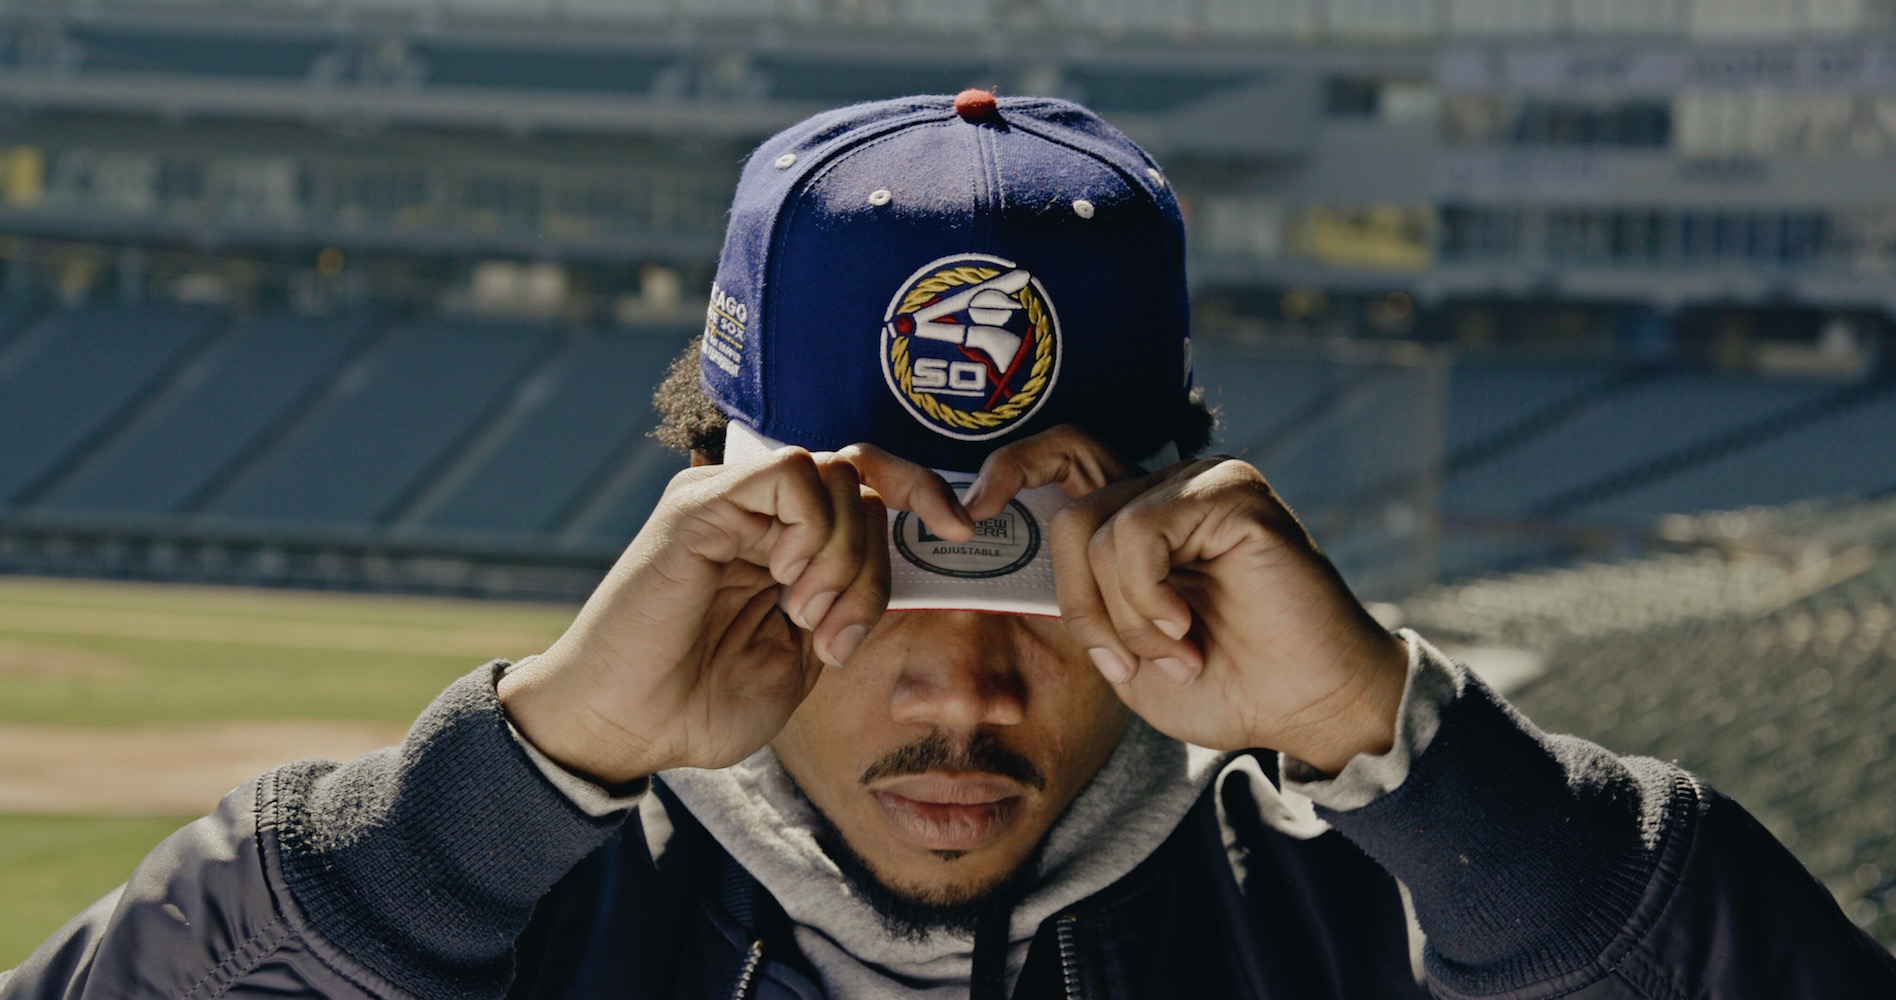 Goot Nylon Socialisme Chance The Rapper Partners with New Era to Redesign White Sox Cap — These  Days